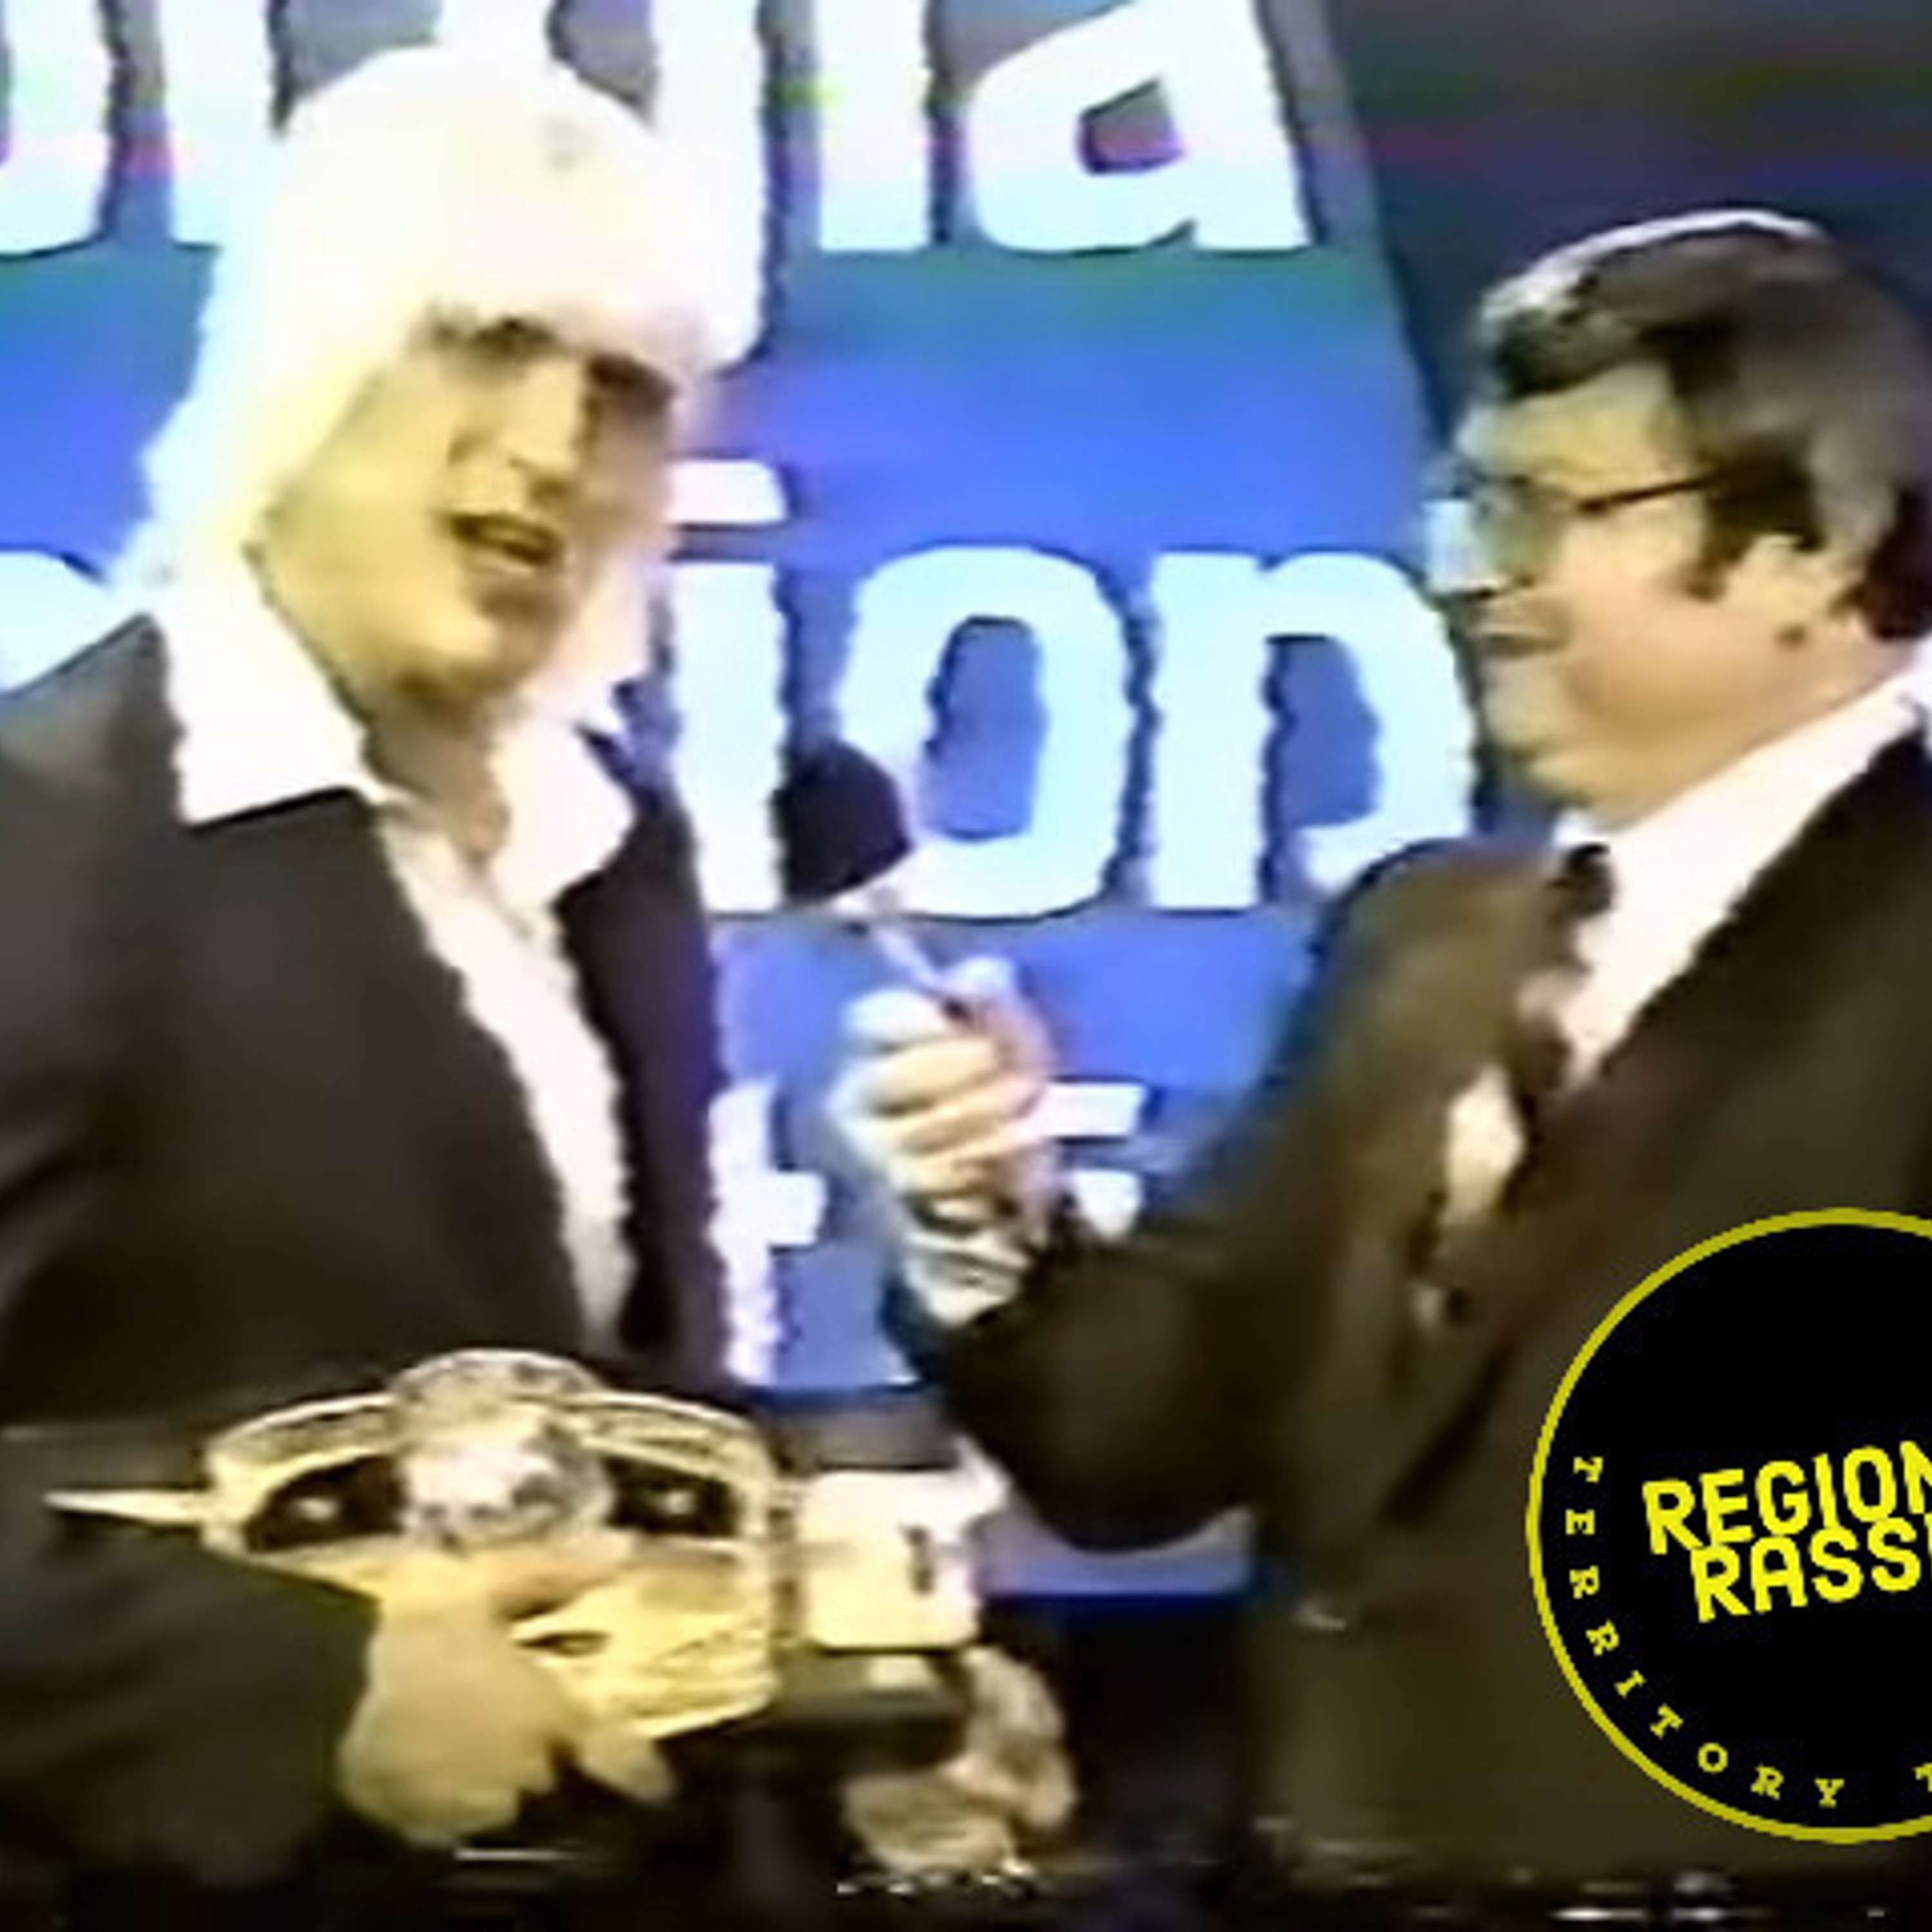 Episode 23: Georgia Wrestling 1981 (Tommy Rich wins NWA Title, Andre Breaks Ankle, IWL Outlaws)